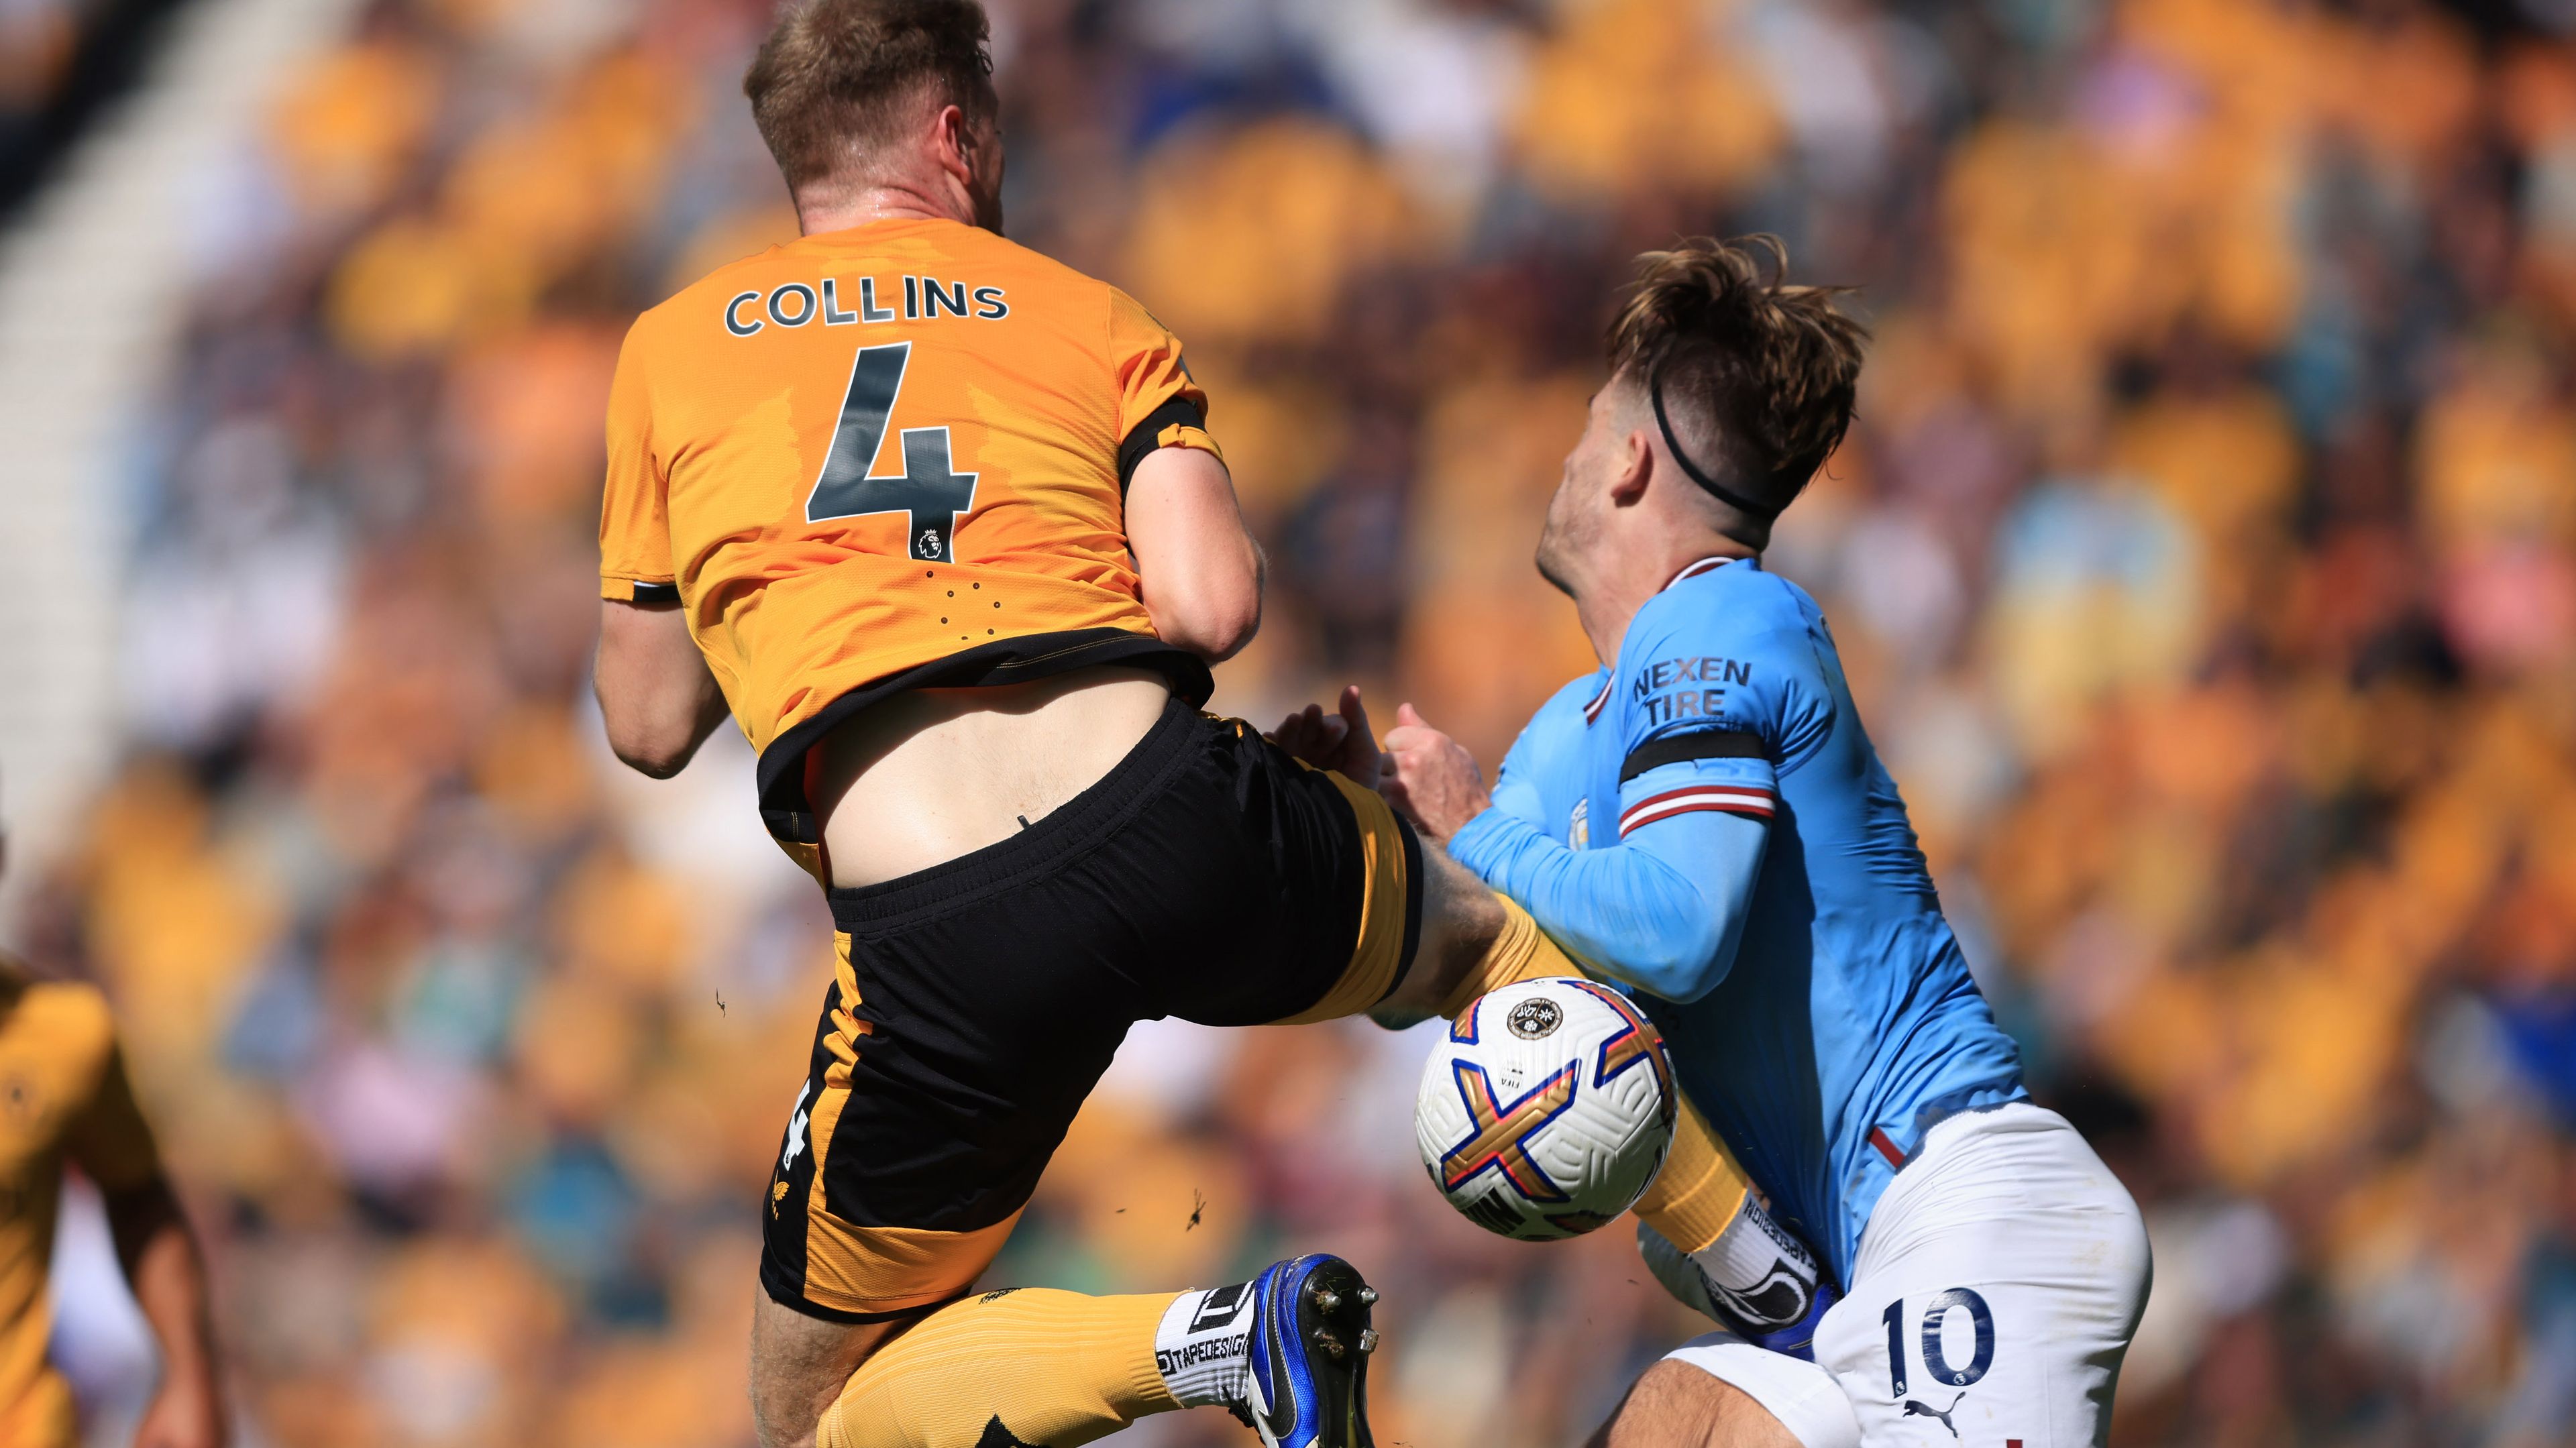 Nathan Collins of Wolverhampton Wanderers is shown a red card for this challenge on Jack Grealish of Manchester City during the Premier League match between Wolverhampton Wanderers and Manchester City at Molineux on September 17, 2022 in Wolverhampton, United Kingdom. (Photo by Marc Atkins/Getty Images)